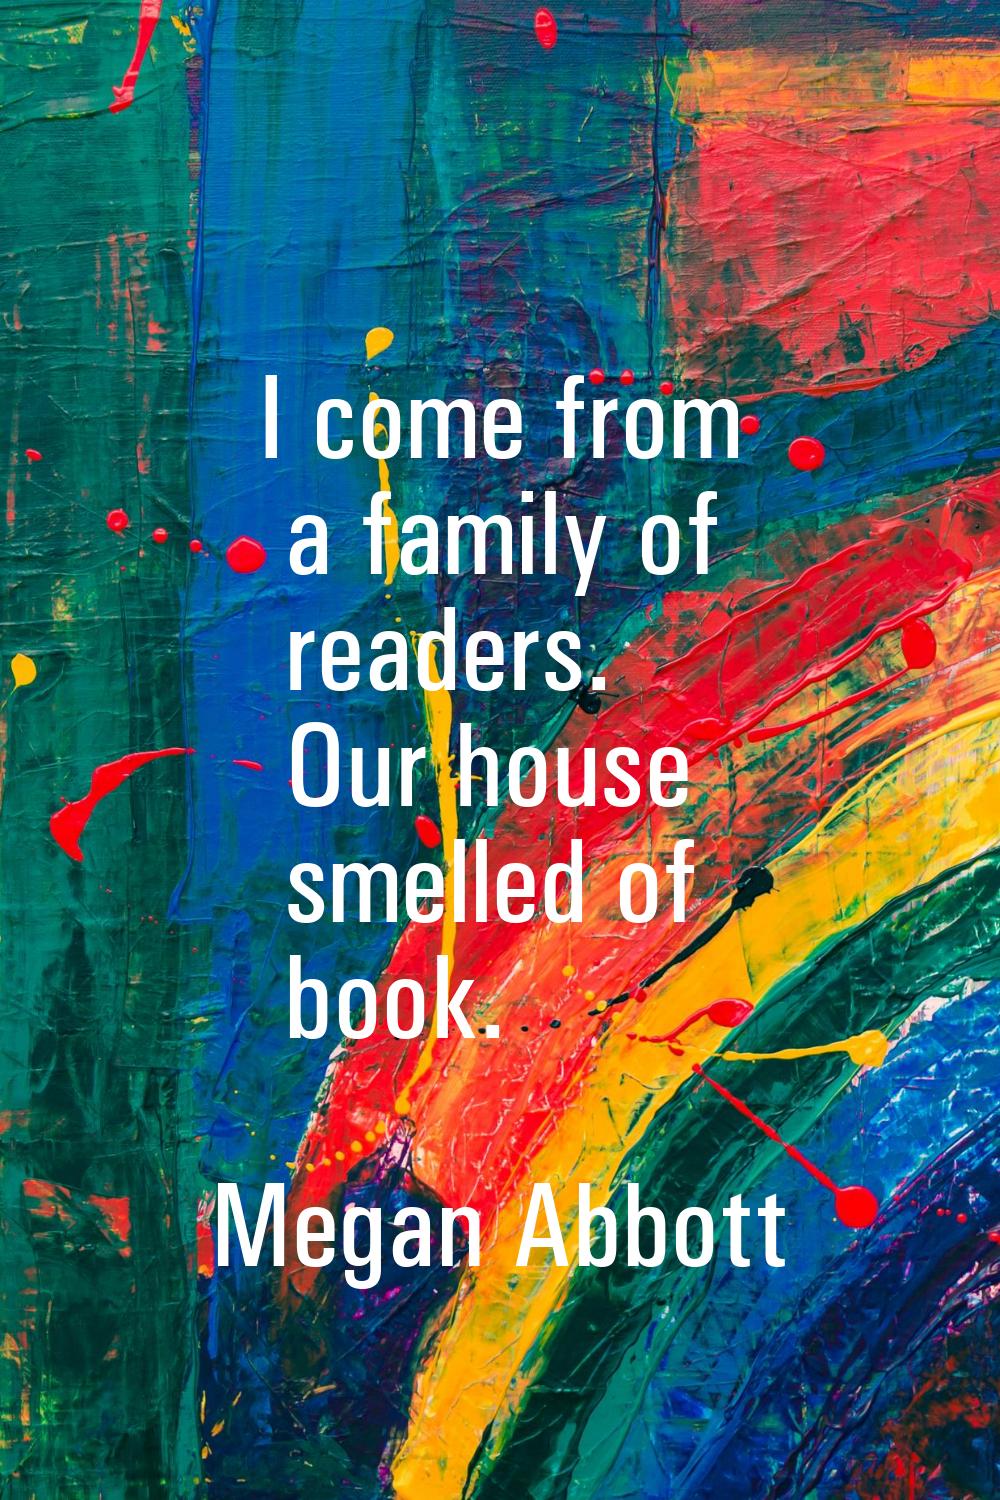 I come from a family of readers. Our house smelled of book.